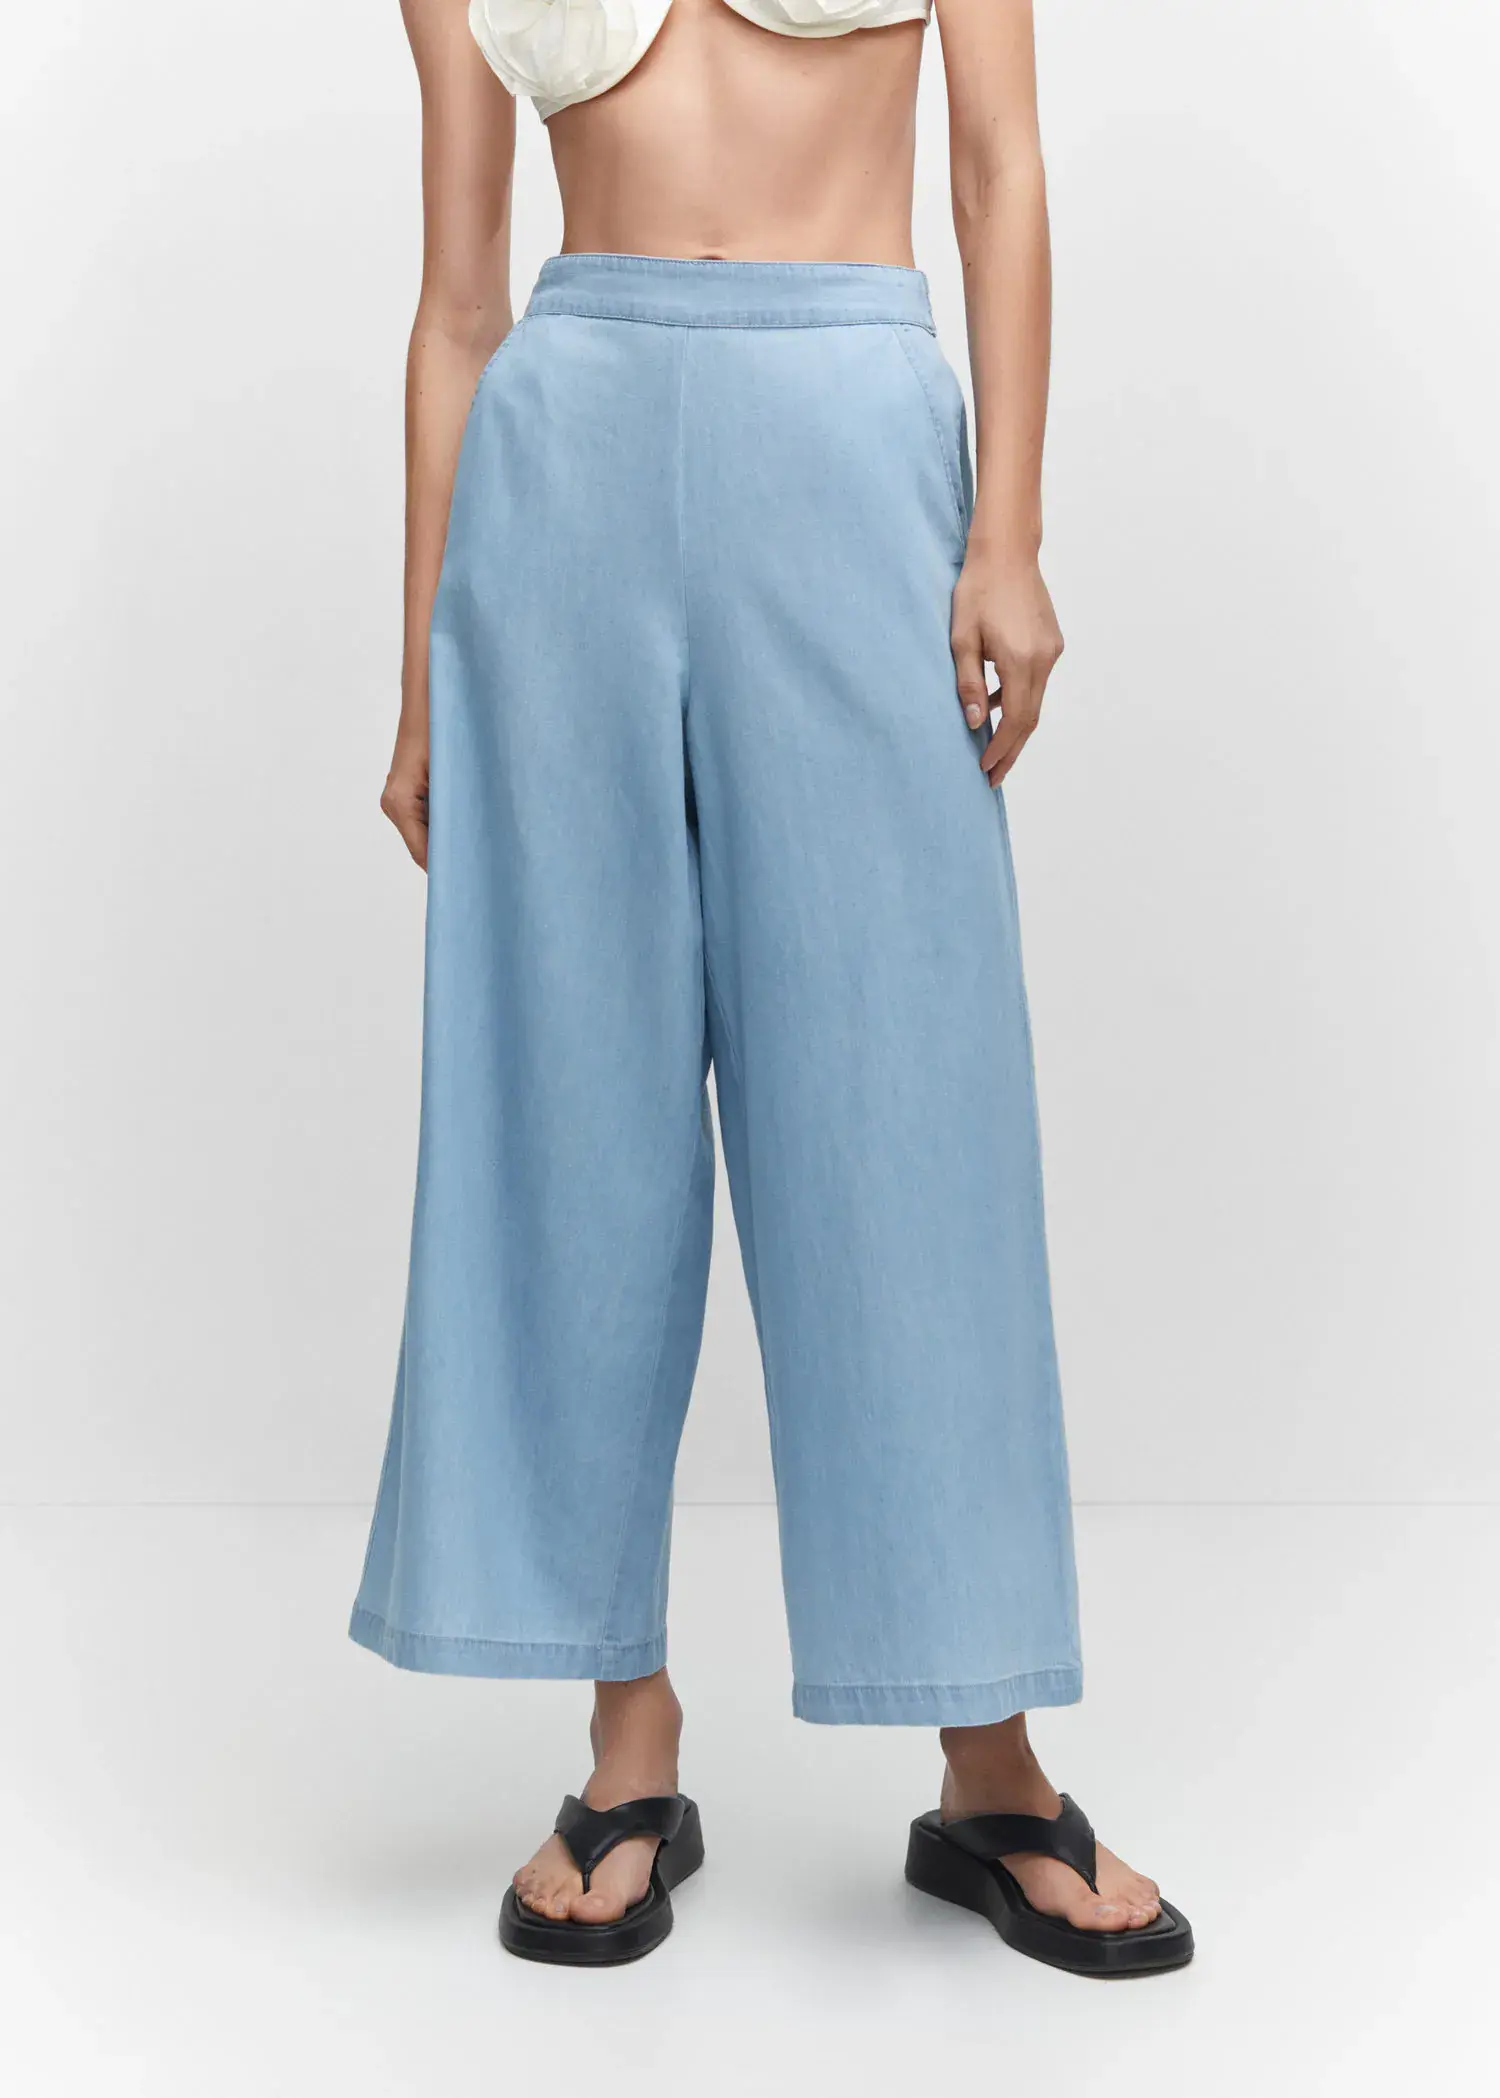 Mango 100% cotton culotte trousers . a person standing wearing a pair of light blue pants. 